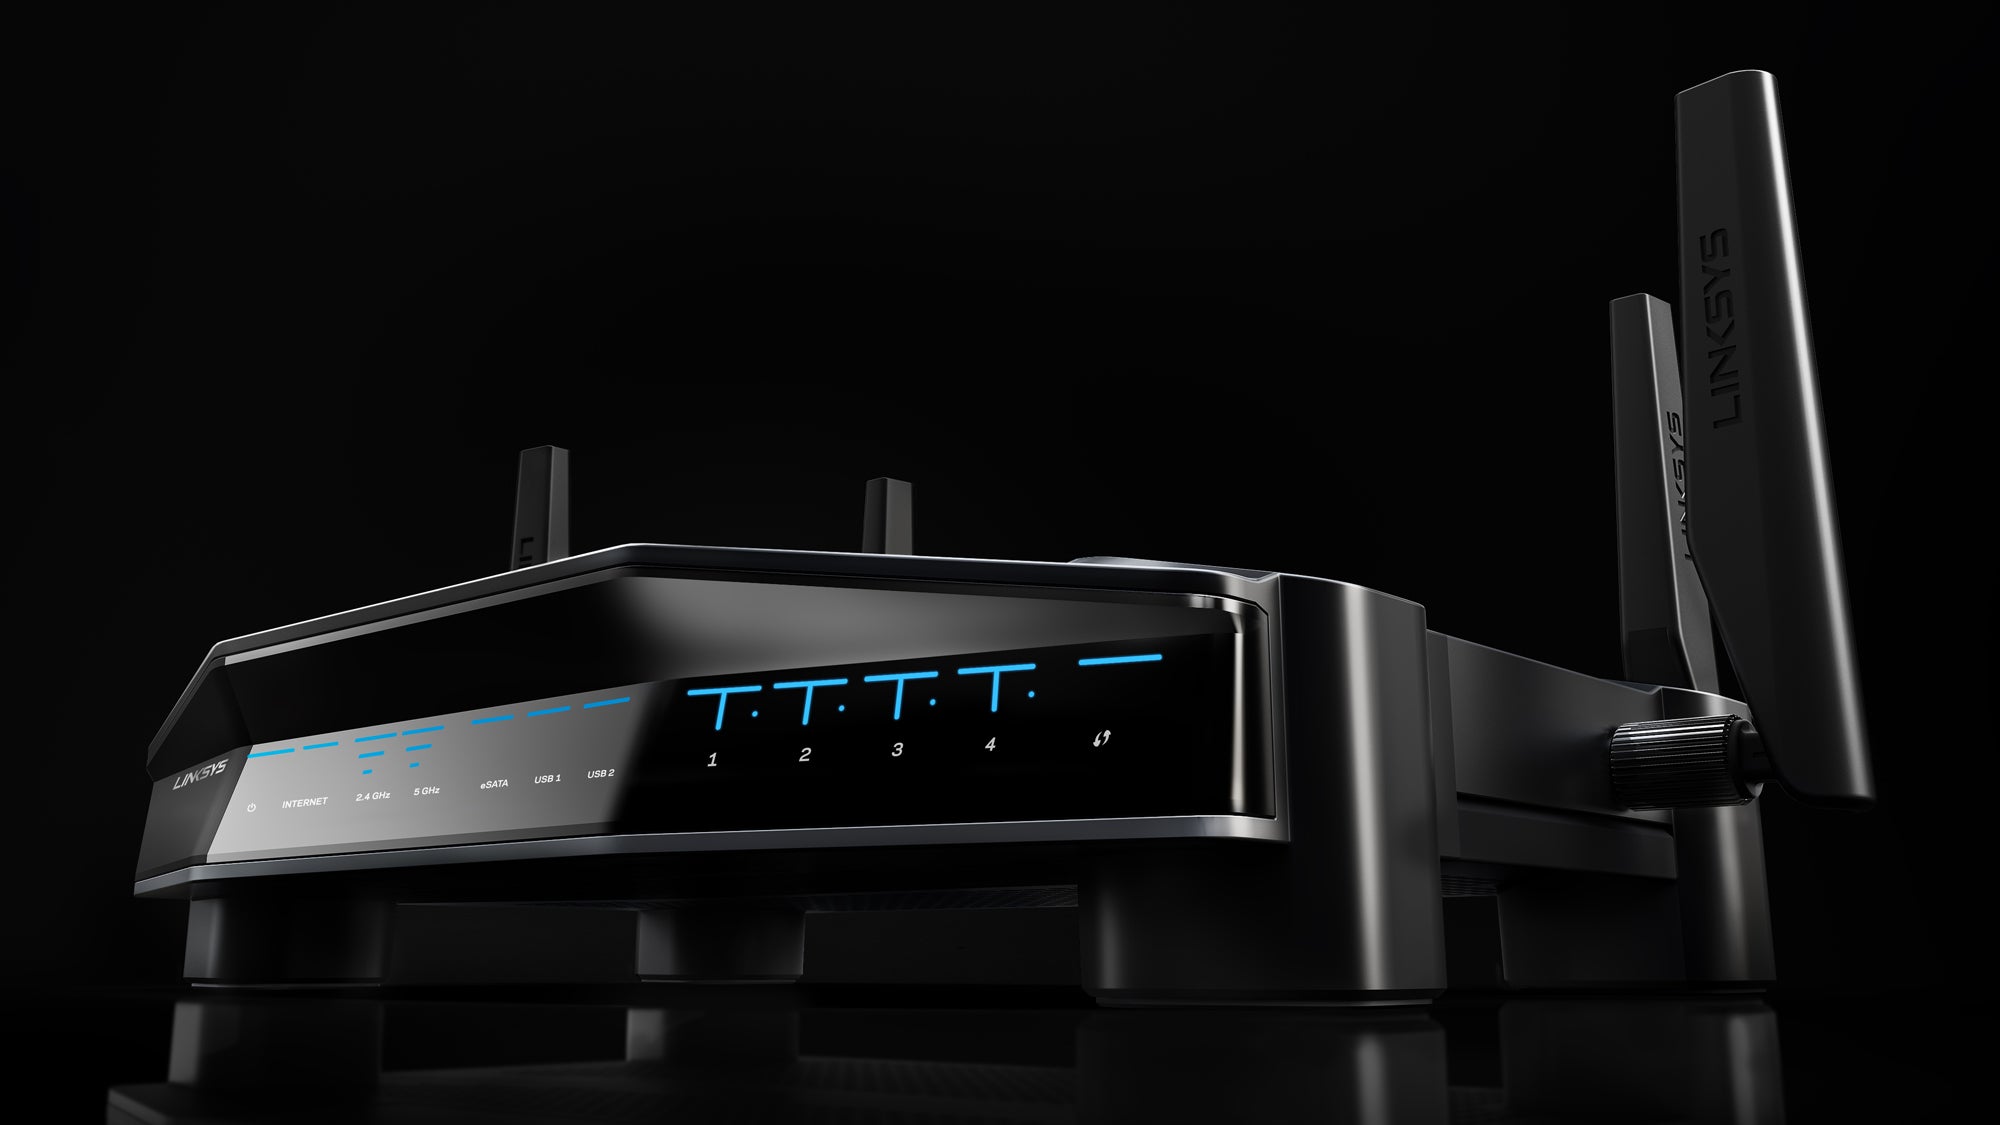 Linksys’s New Router Puts Video Games First